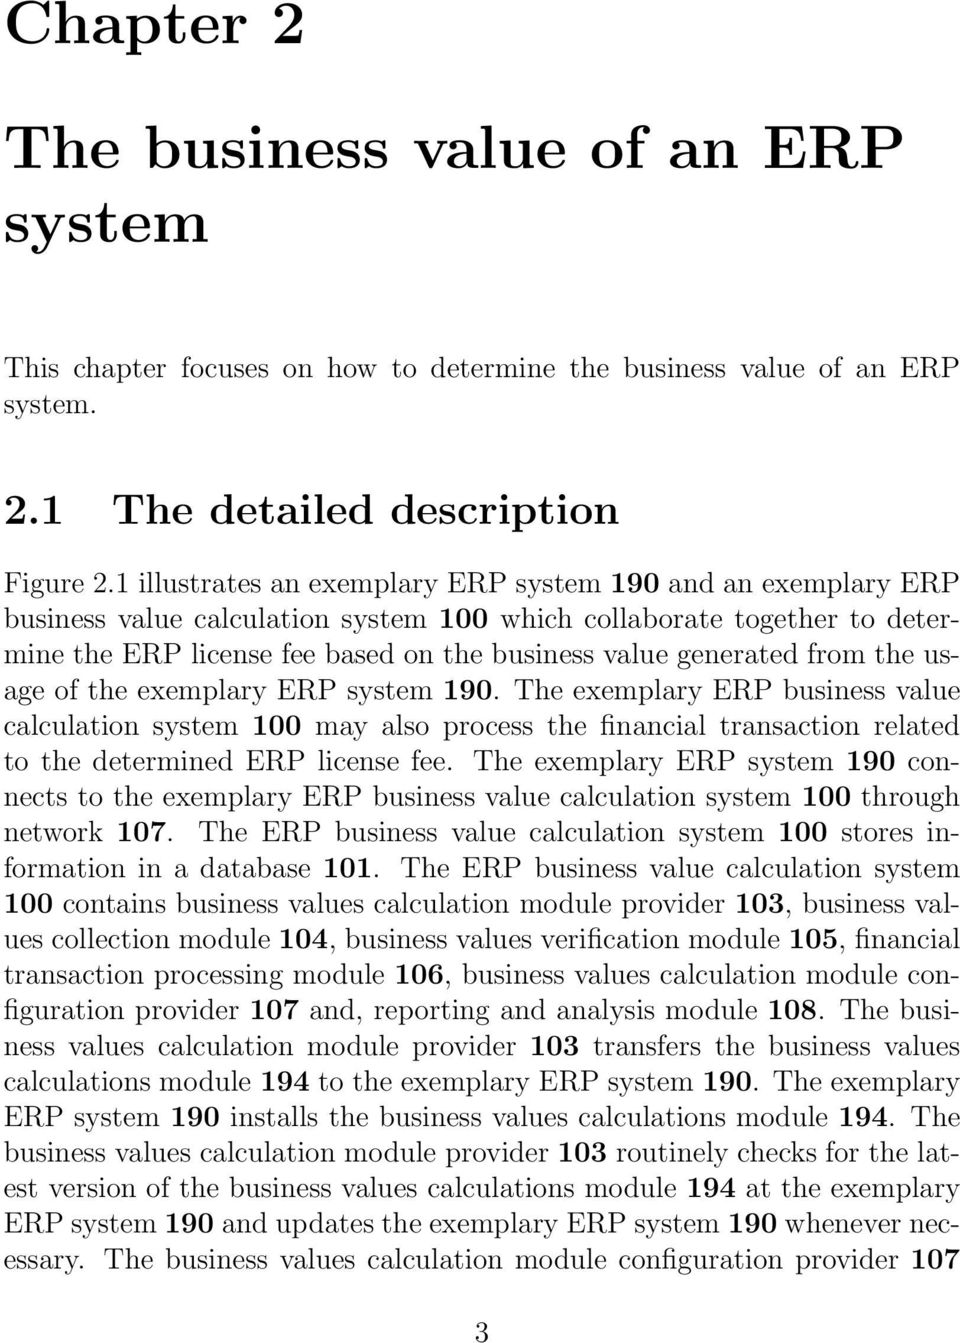 from the usage of the exemplary ERP system 190. The exemplary ERP business value calculation system 100 may also process the financial transaction related to the determined ERP license fee.